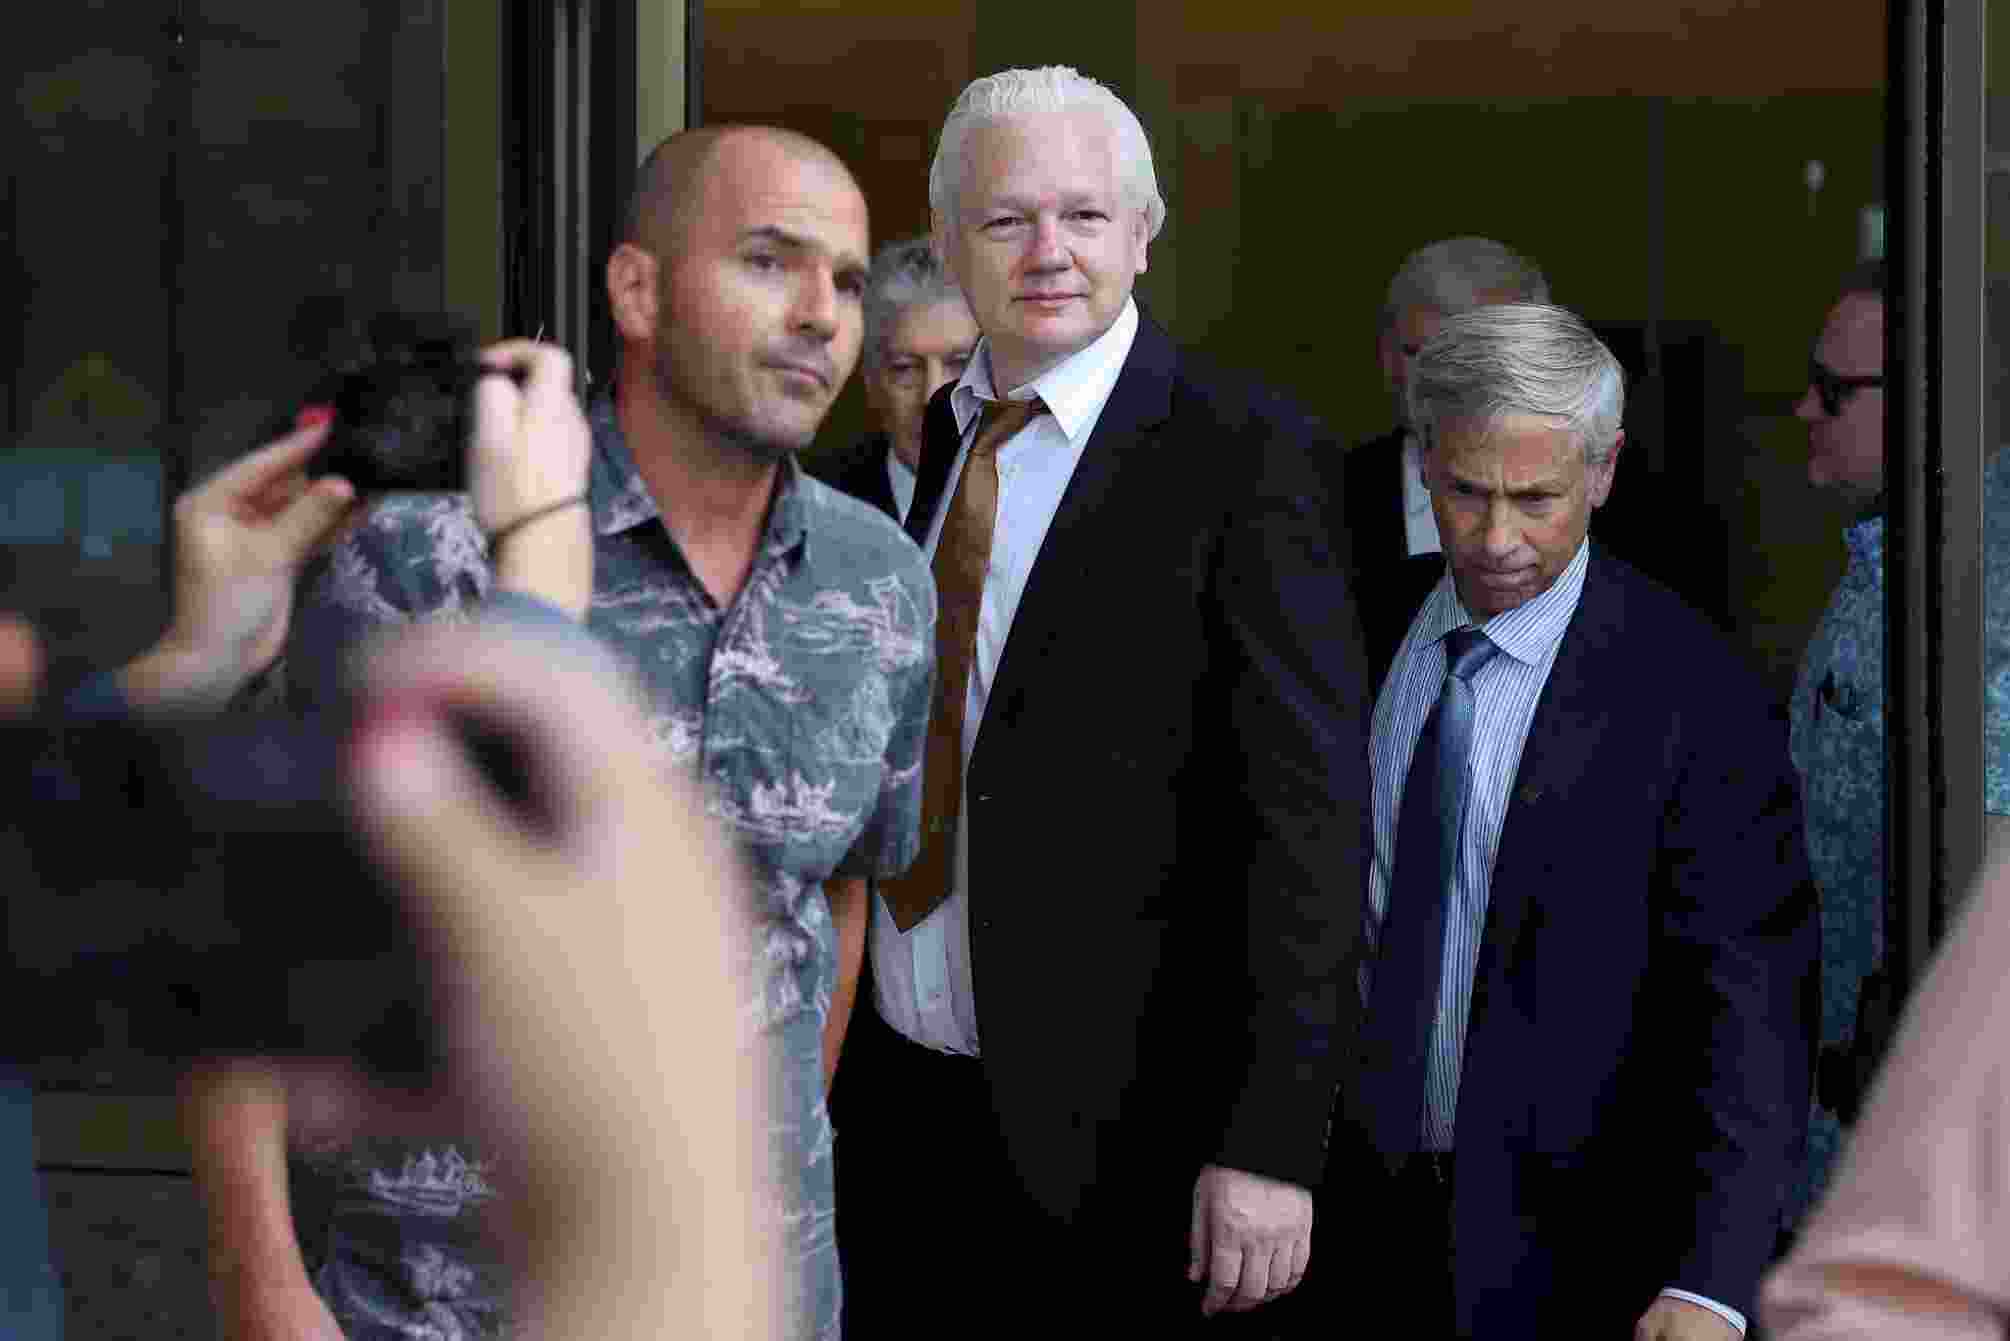 WikiLeaks founder Julian Assange, 52, pled guilty on Wednesday to conspiring to access and disclose classified US military information.